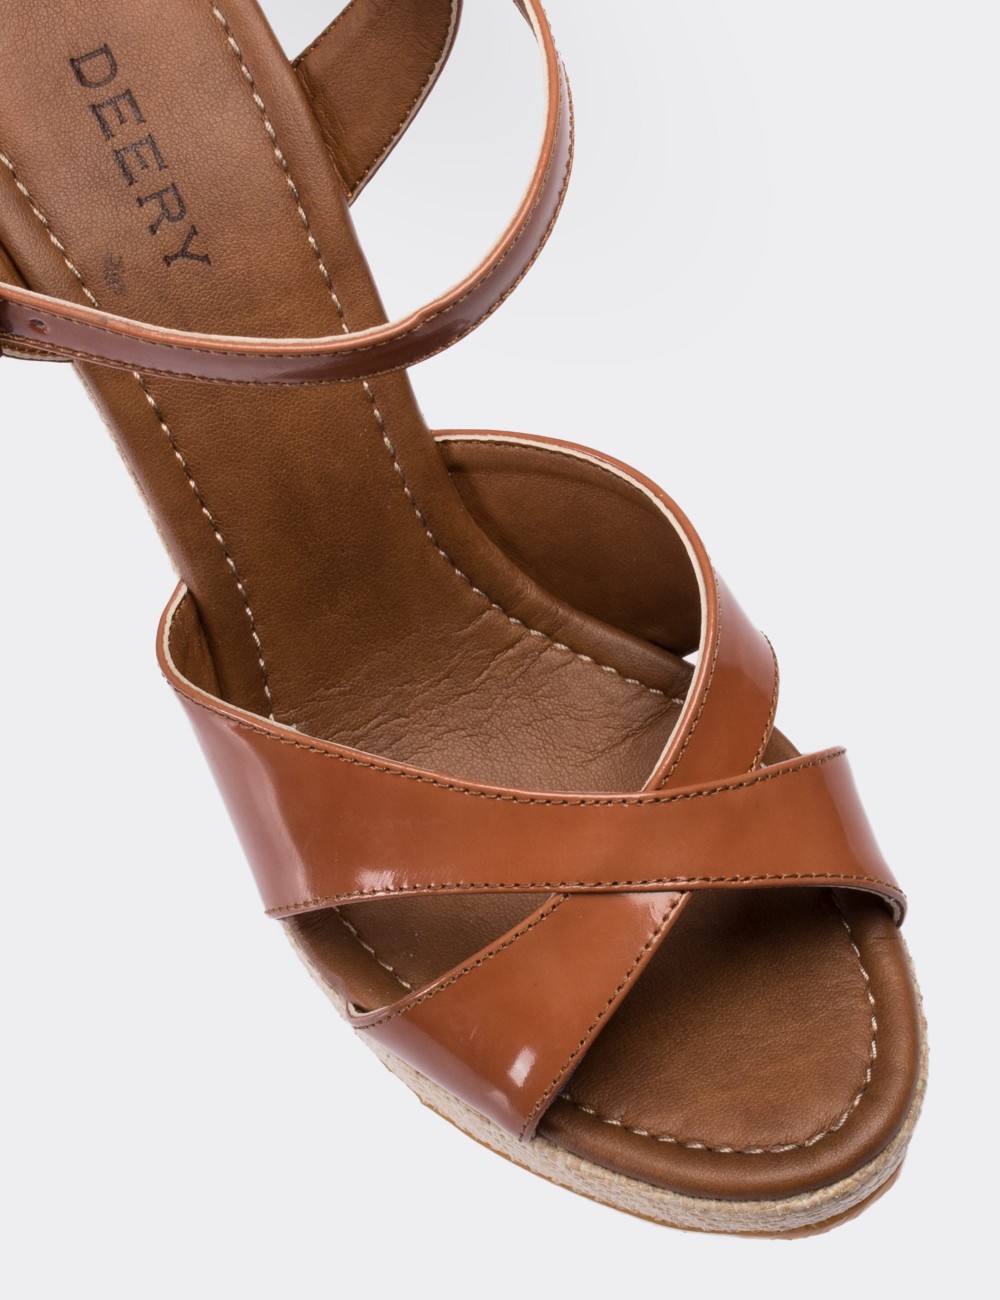 Tan  Leather Sandals - 02051ZTBAC01